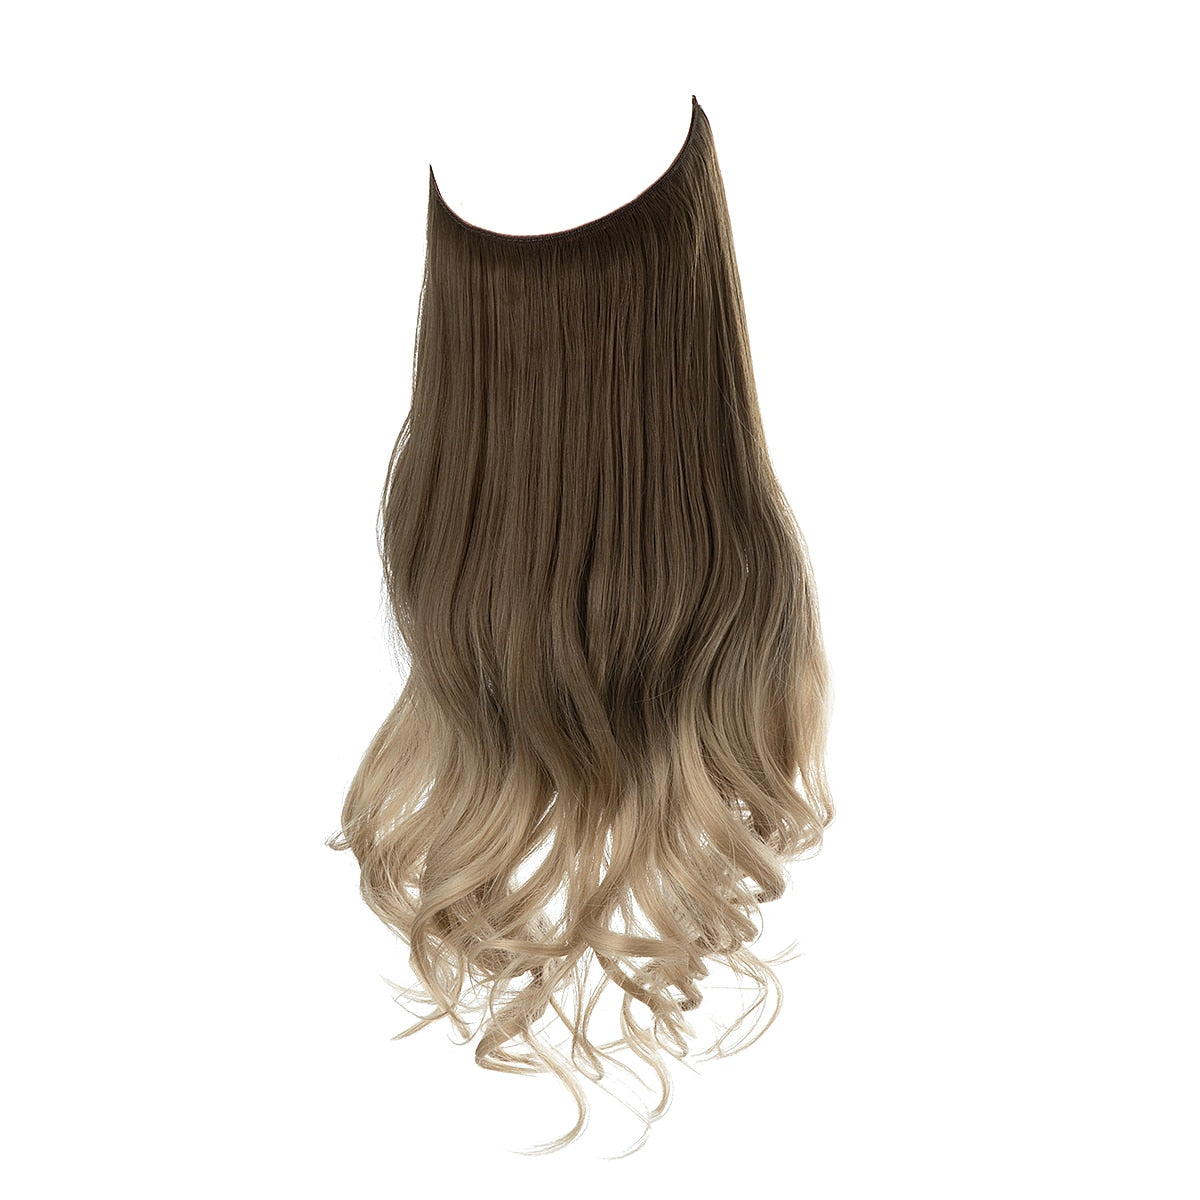 TEEK - Invisible Synth No Clip No Comb Wave Hair Extensions | Dark Varieties HAIR theteekdotcom 8T16 14inches 